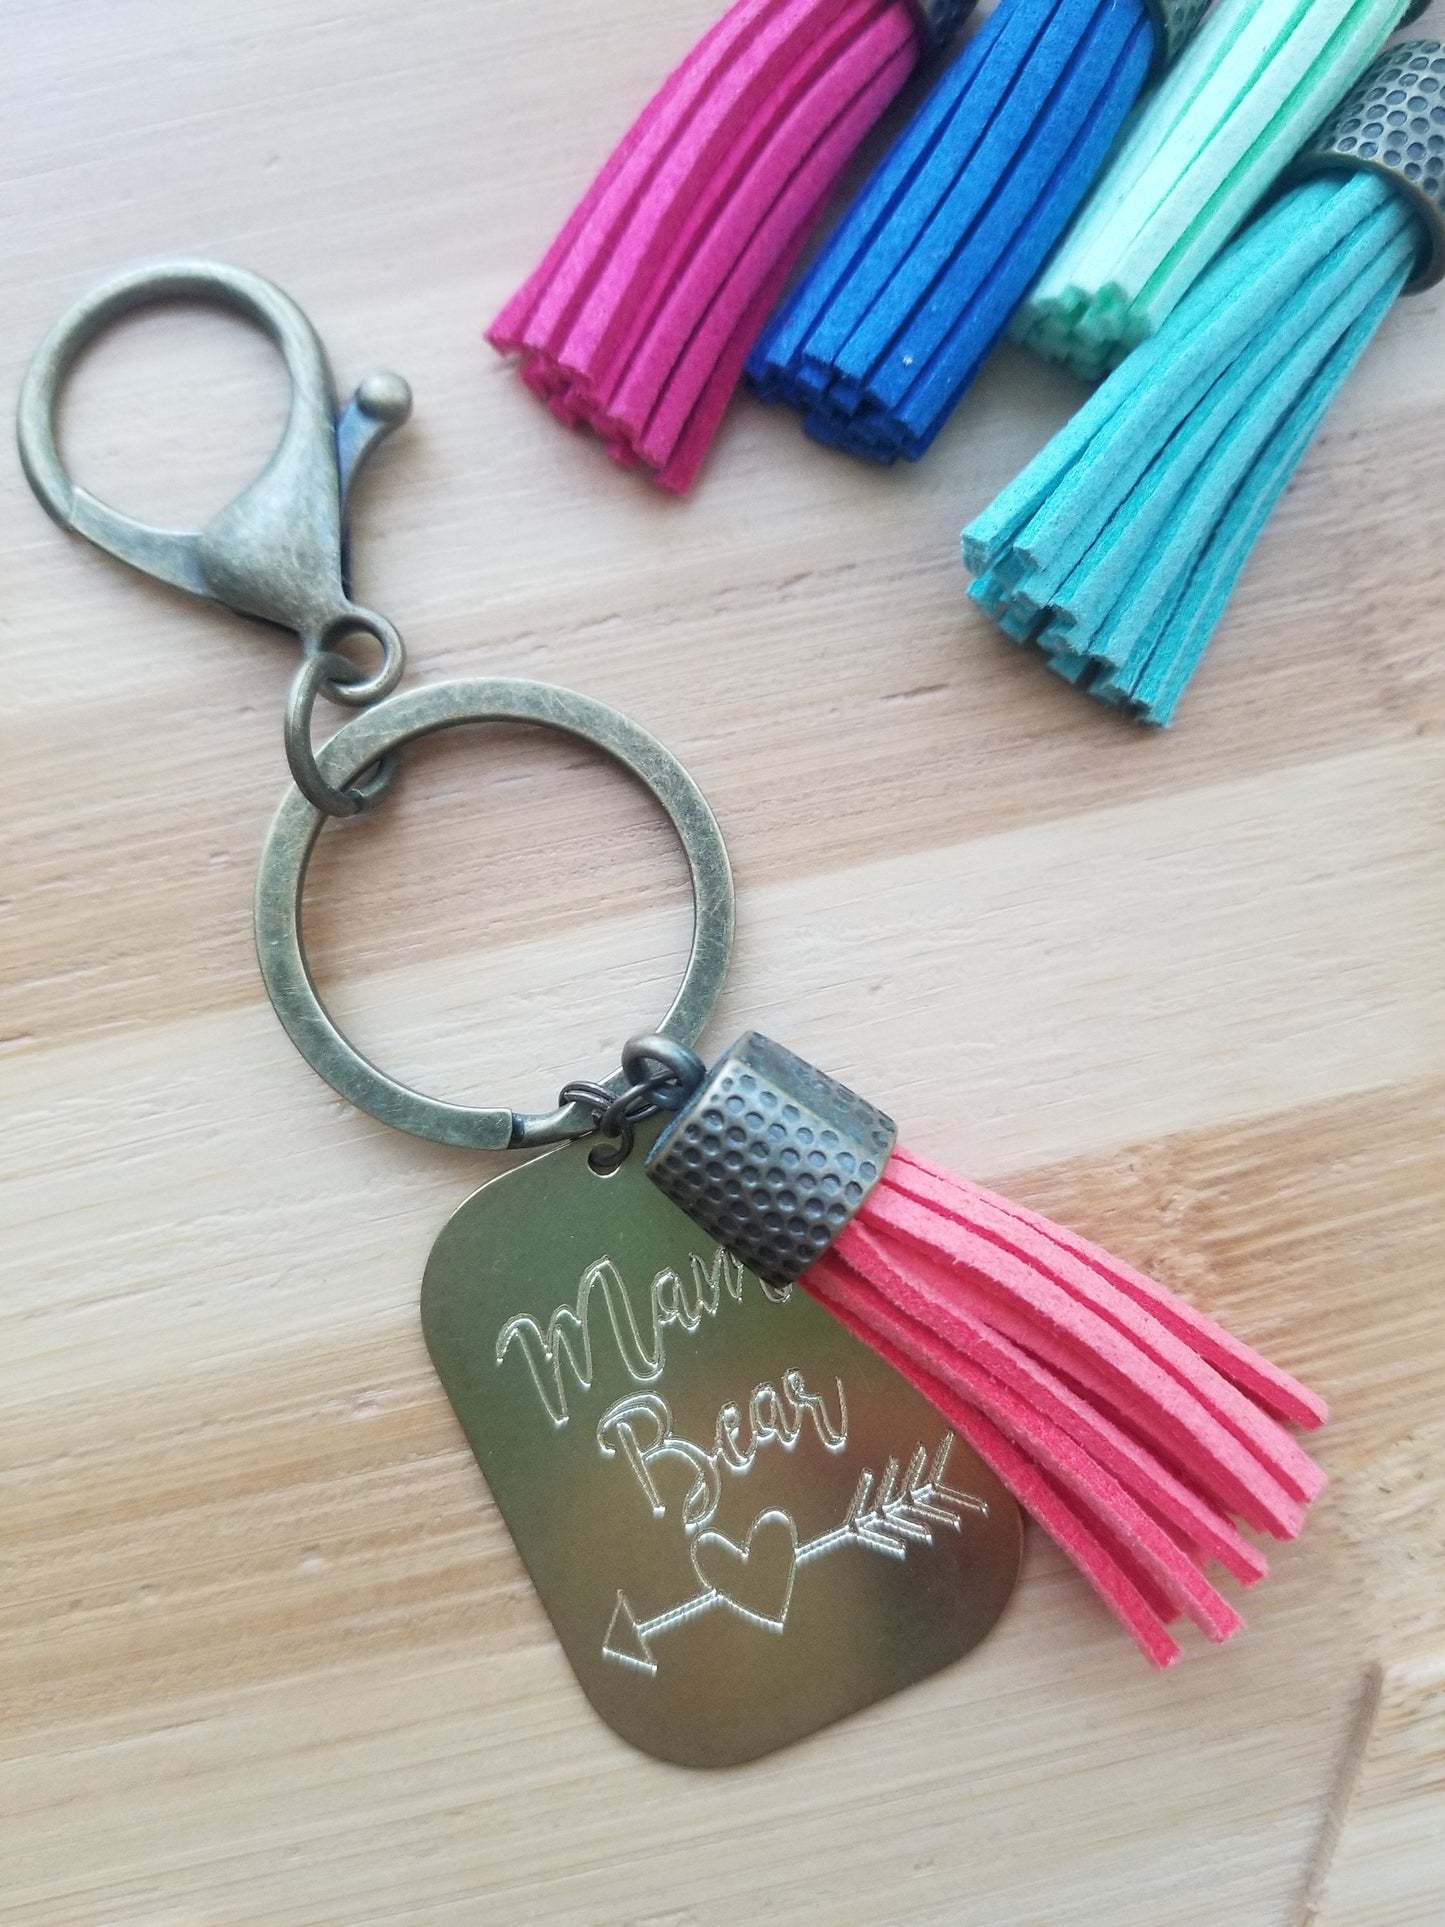 Personalized engraving on a keychain, for Mama Bear